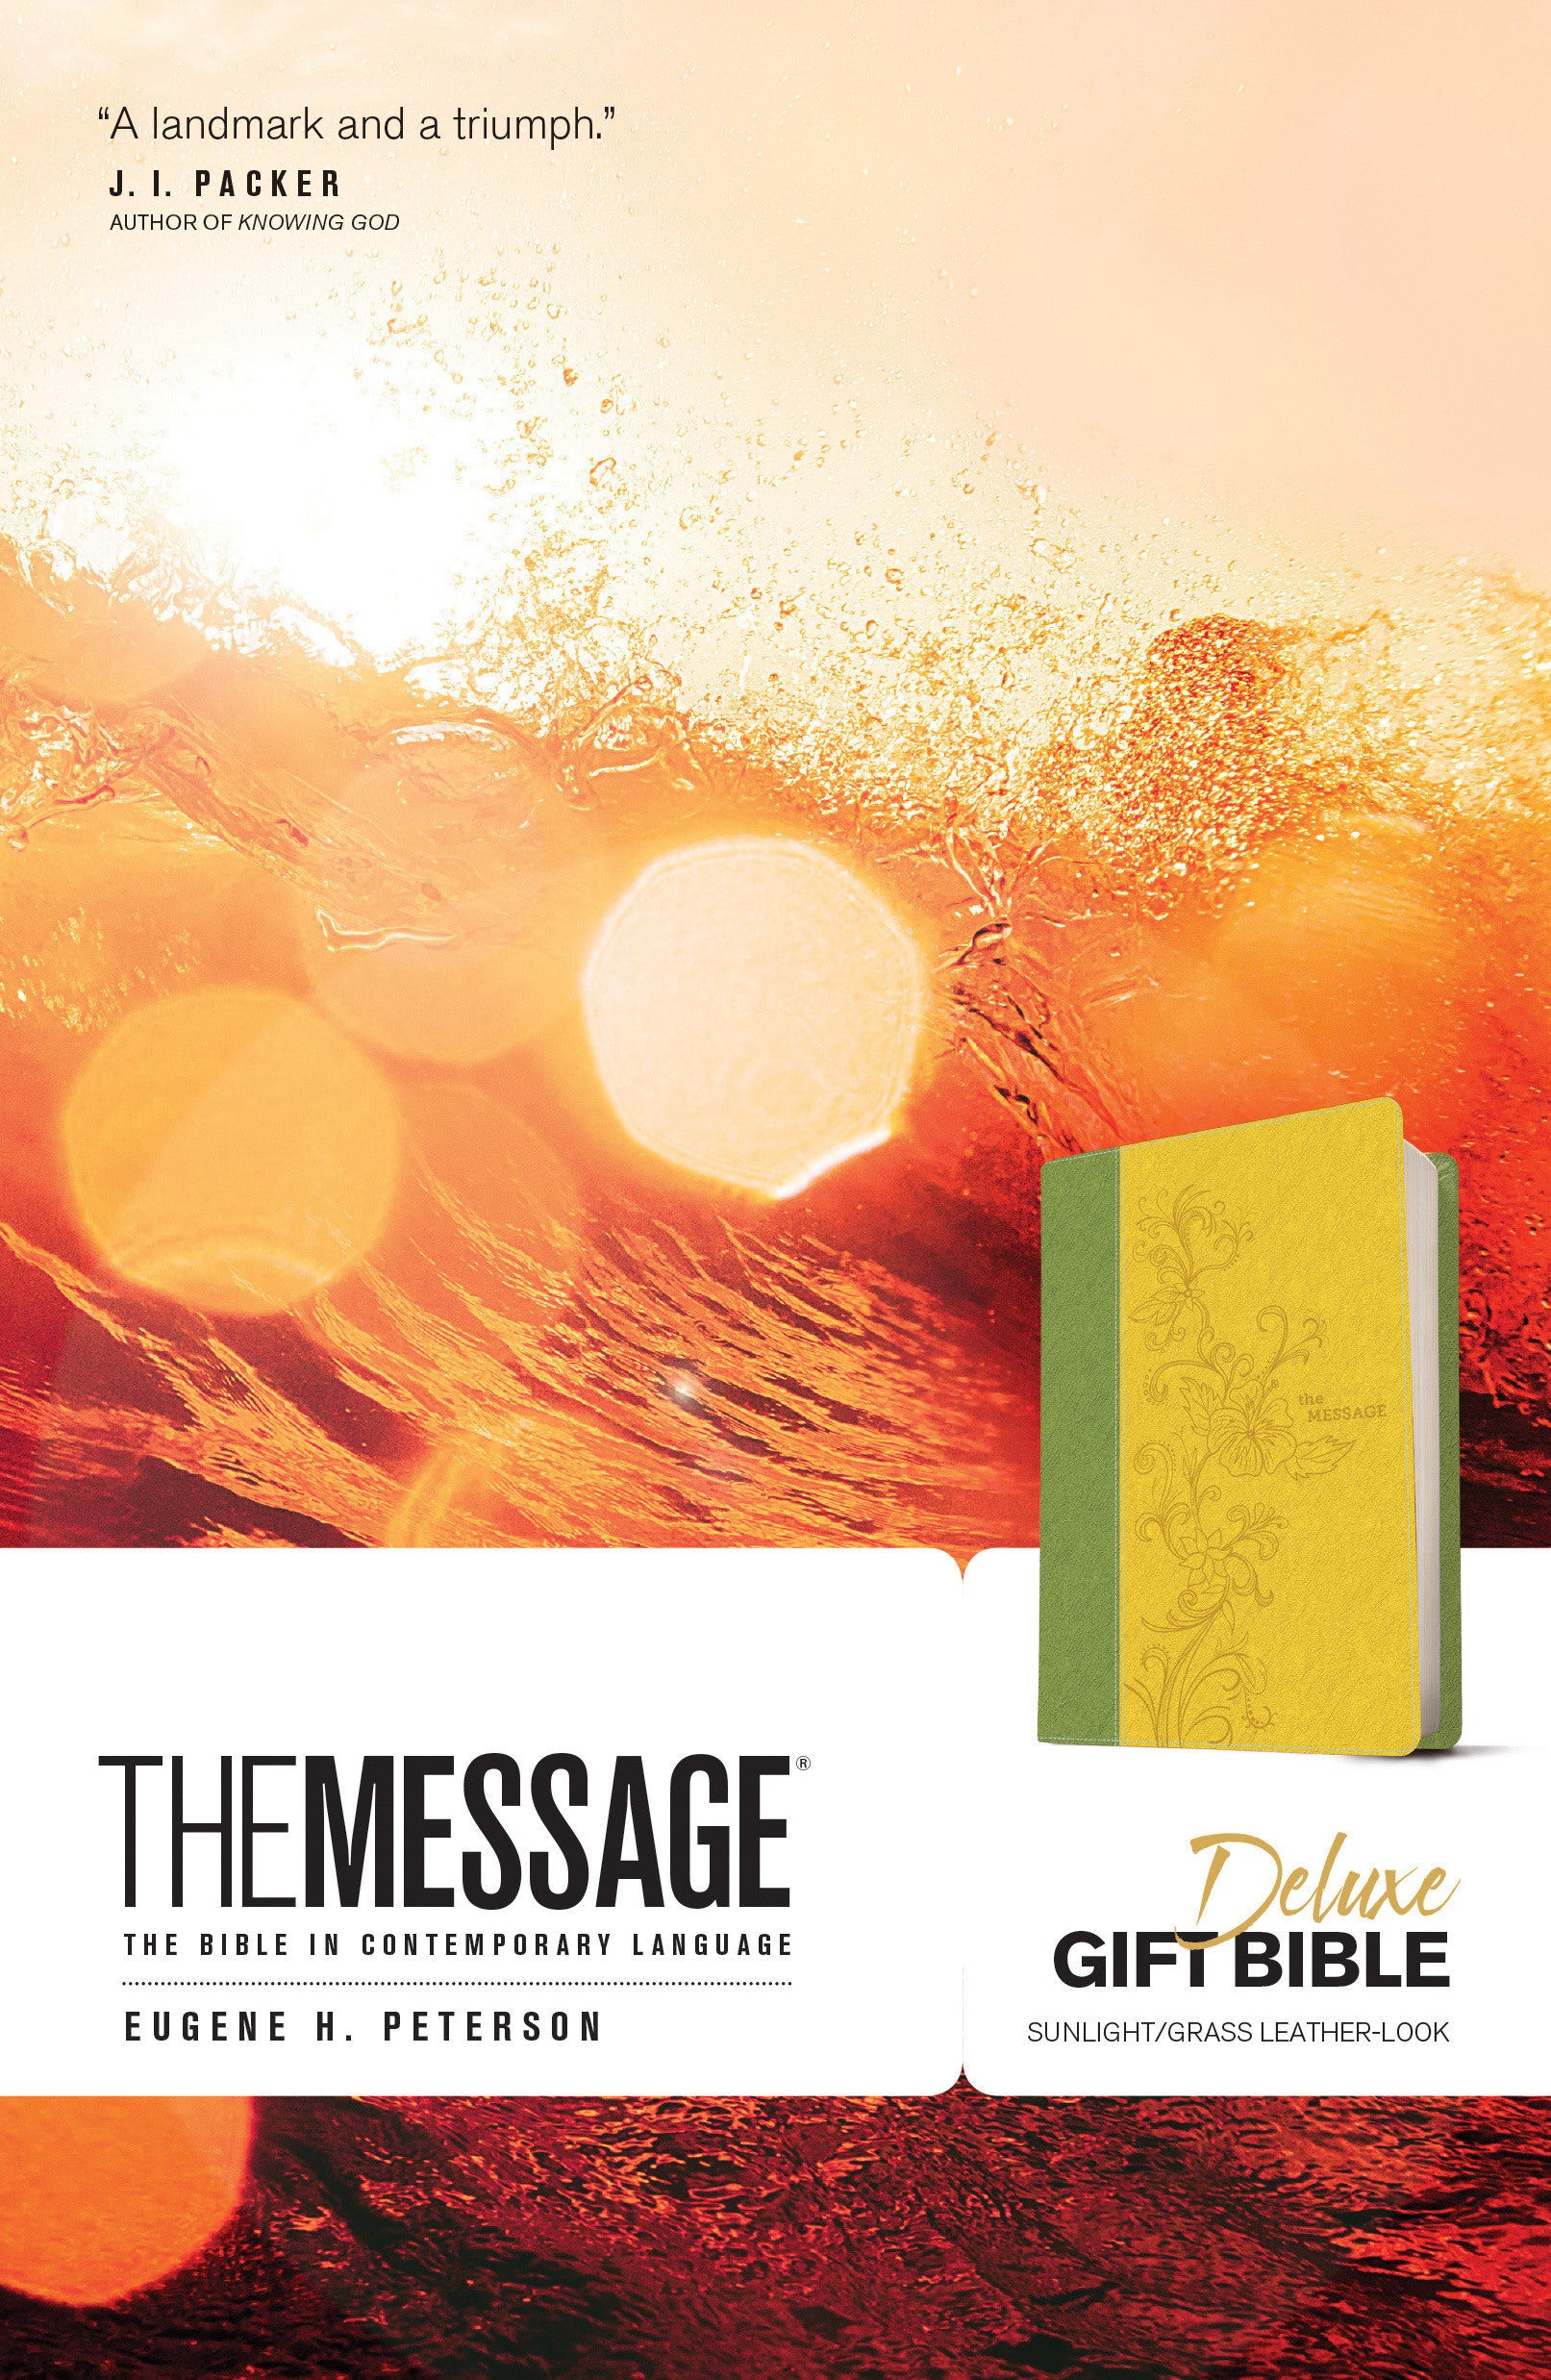 Image of The Message Deluxe Gift Bible other